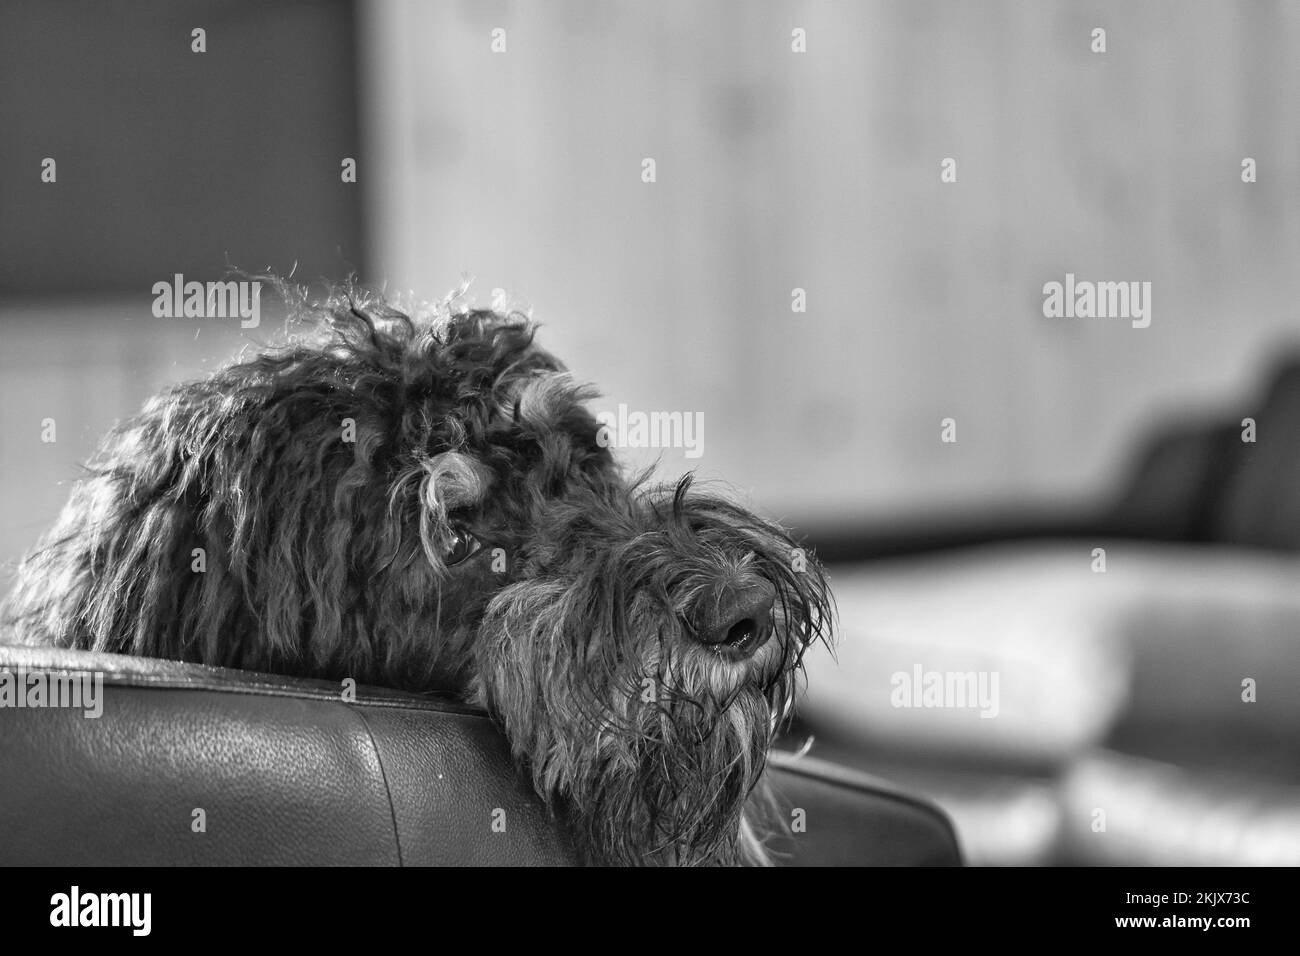 Goldendoodle lying relaxed on armchair shot in black and white. Family dog chilling. Animal photo of dog Stock Photo